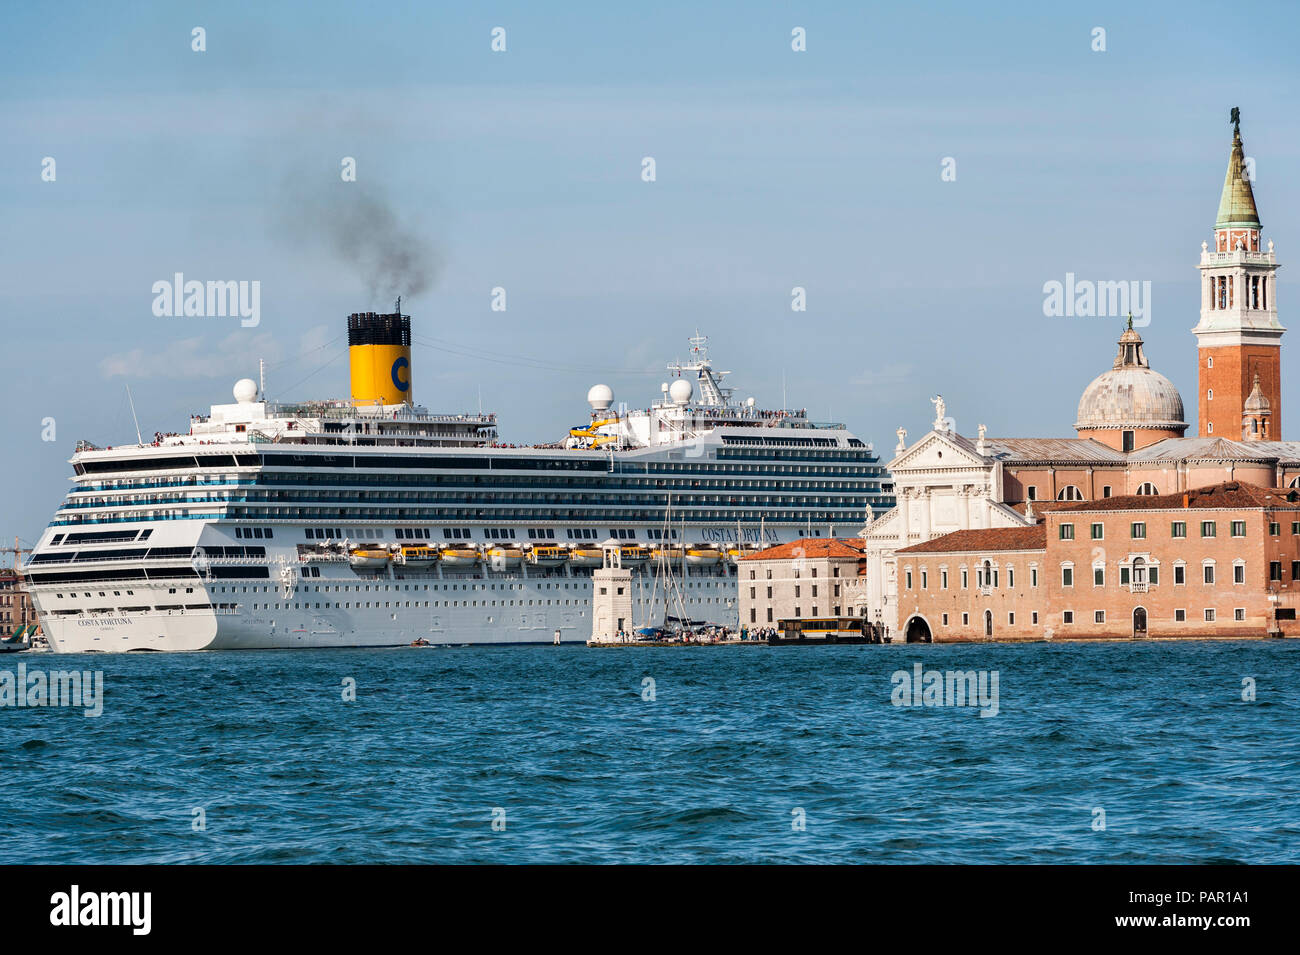 The huge cruise ship Costa Fortuna (owned by the cruise company Carnival Corporation) in Venice, Italy, passing the church of San Giorgio Maggiore Stock Photo